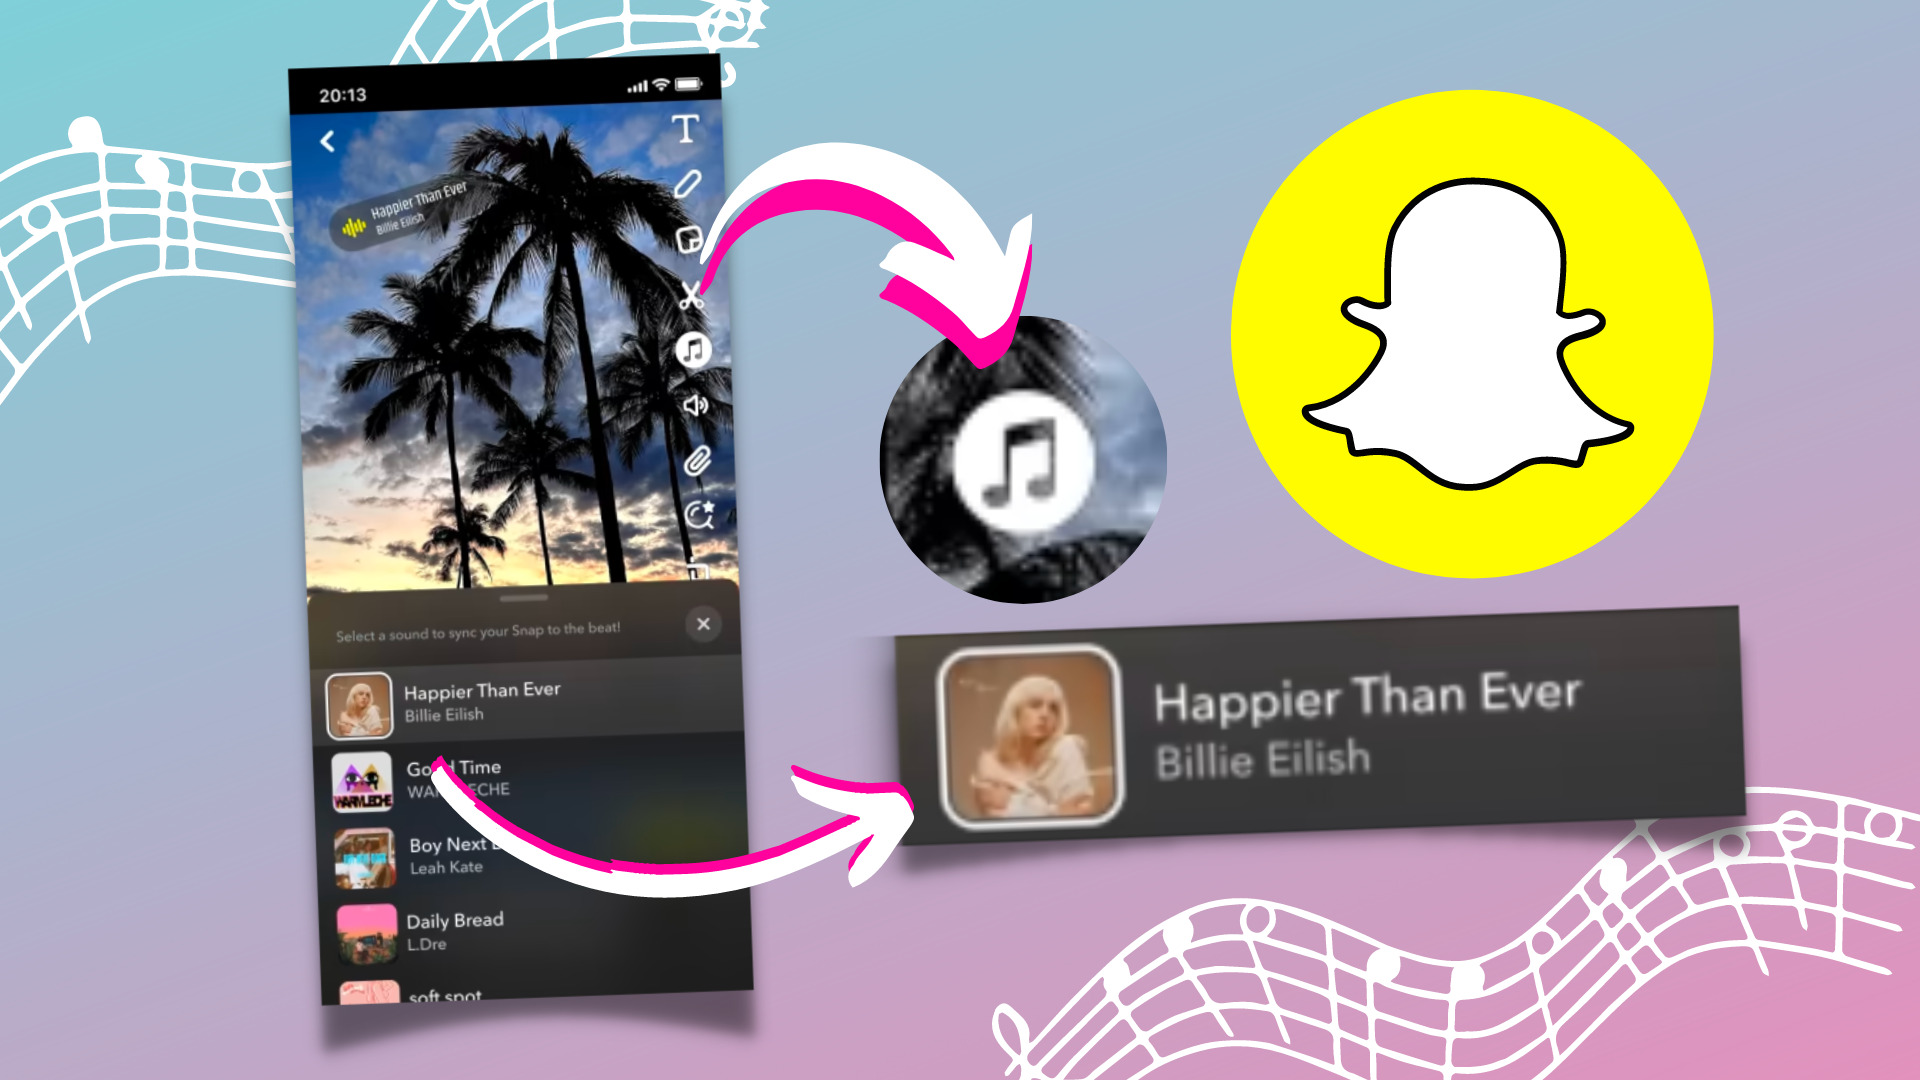 Snapchat Adds A Bunch Of New Sounds To Its Creative Toolset